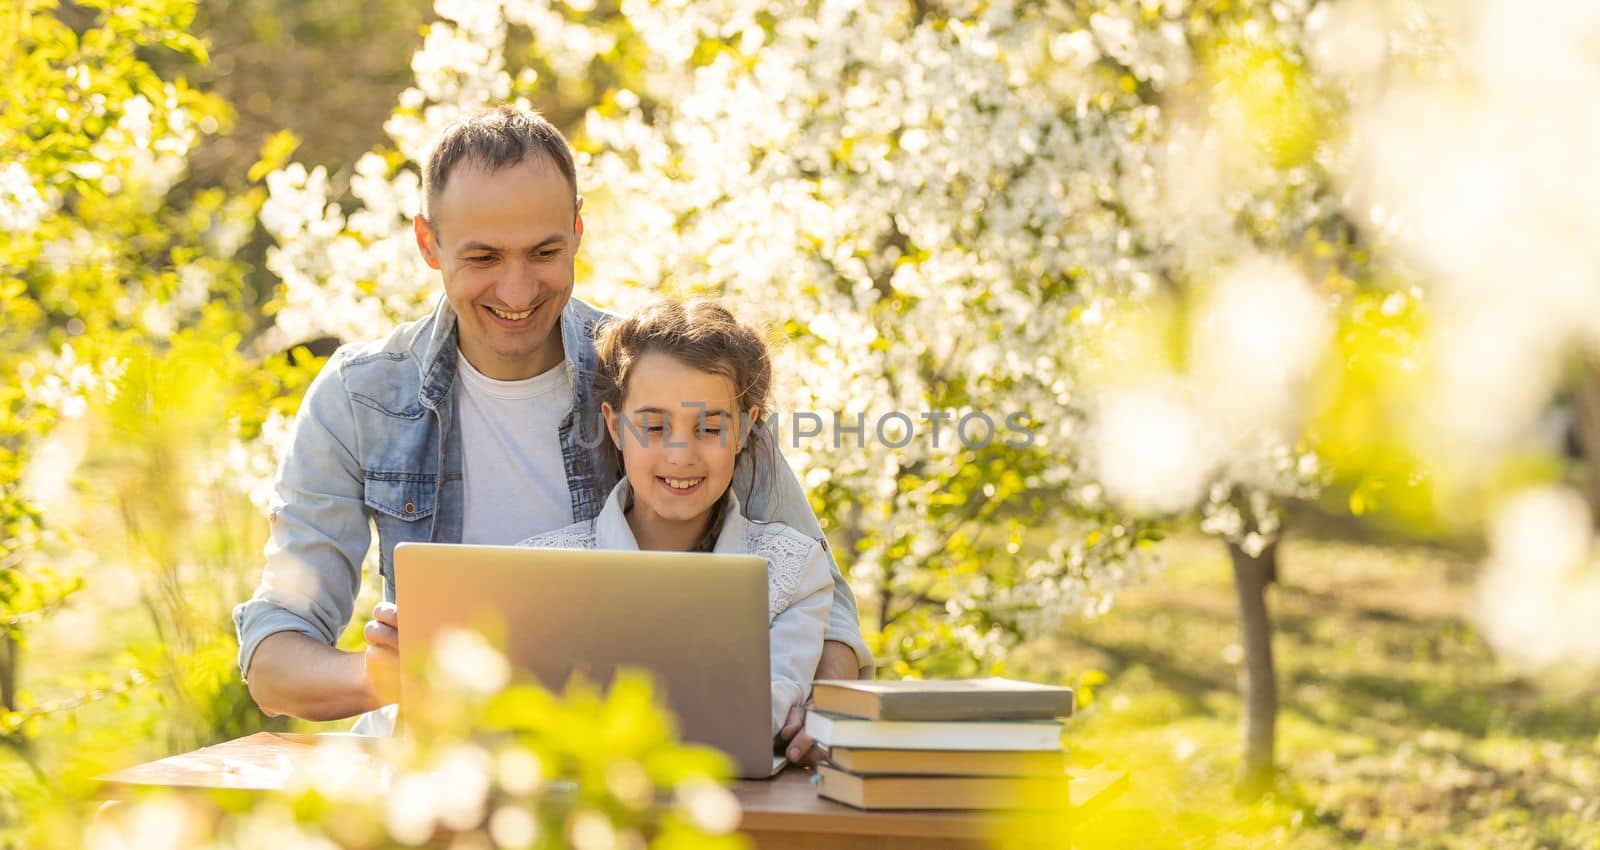 Caring young father helps little daughter, studying together watch online lesson on laptop, attentive dad and small girl child learning at home, have web class on computer on quarantine. outdoor.